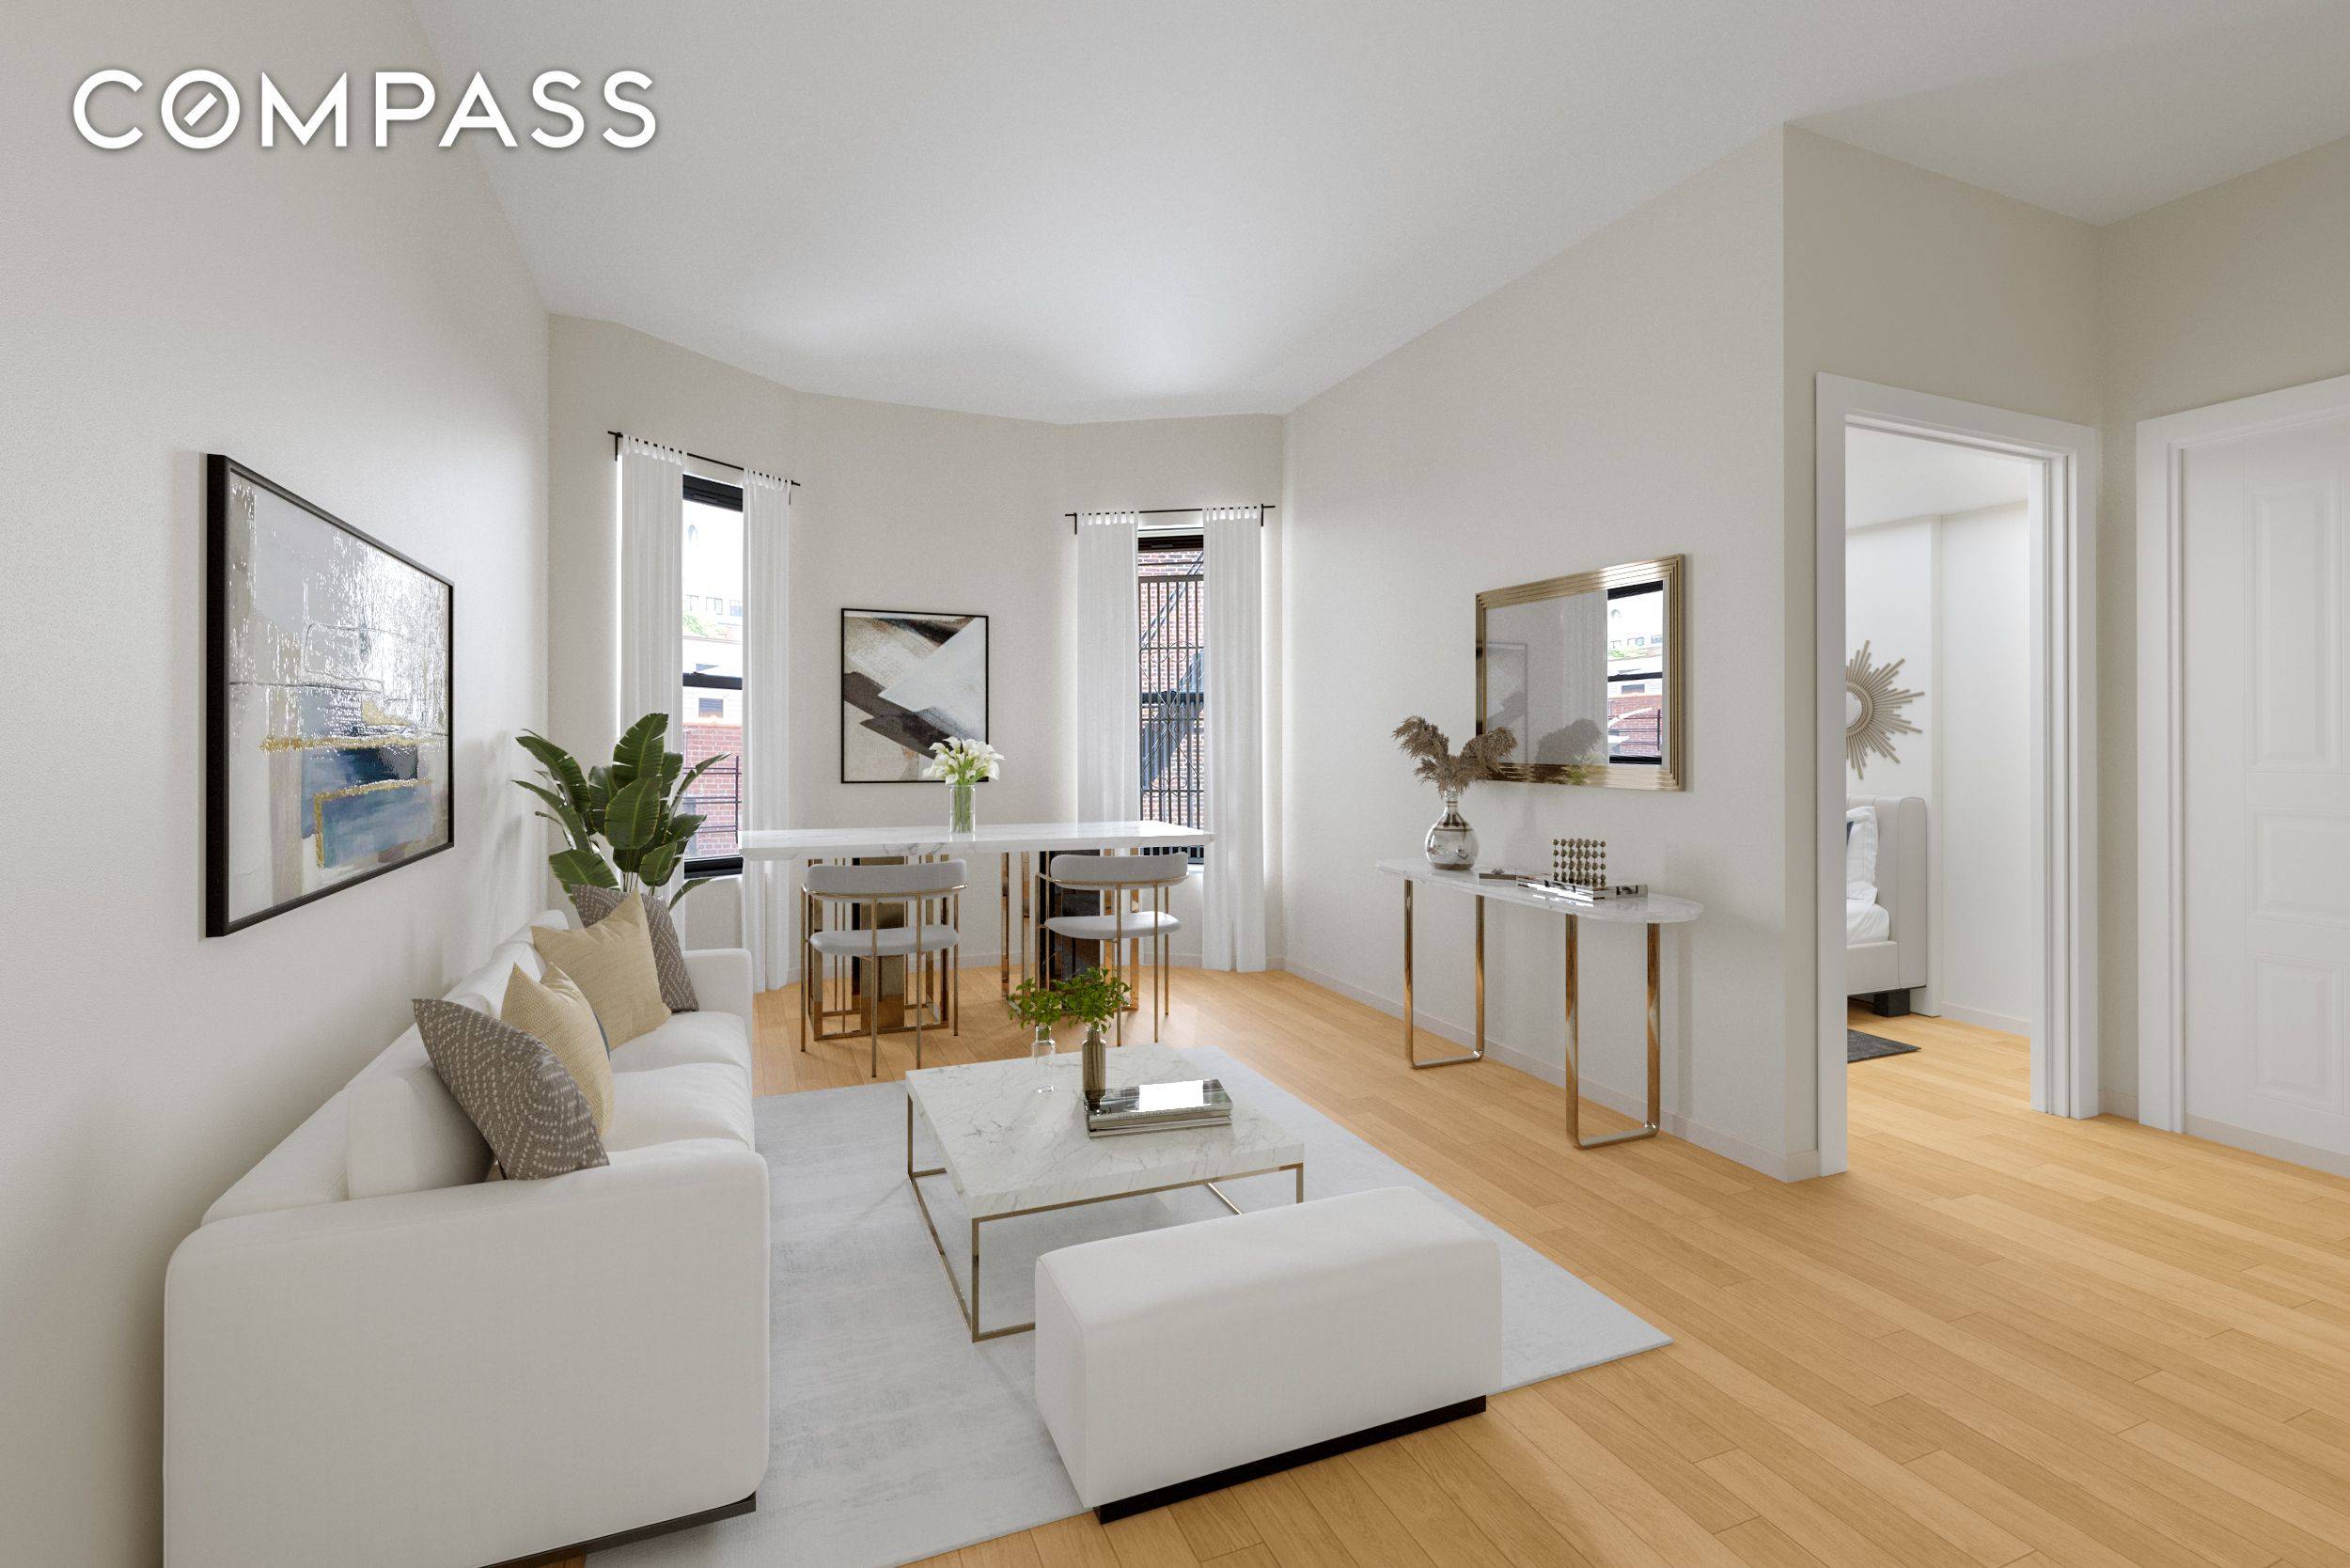 Located in a lovely Carnegie Hill co op, apartment 7A is sure to impress.